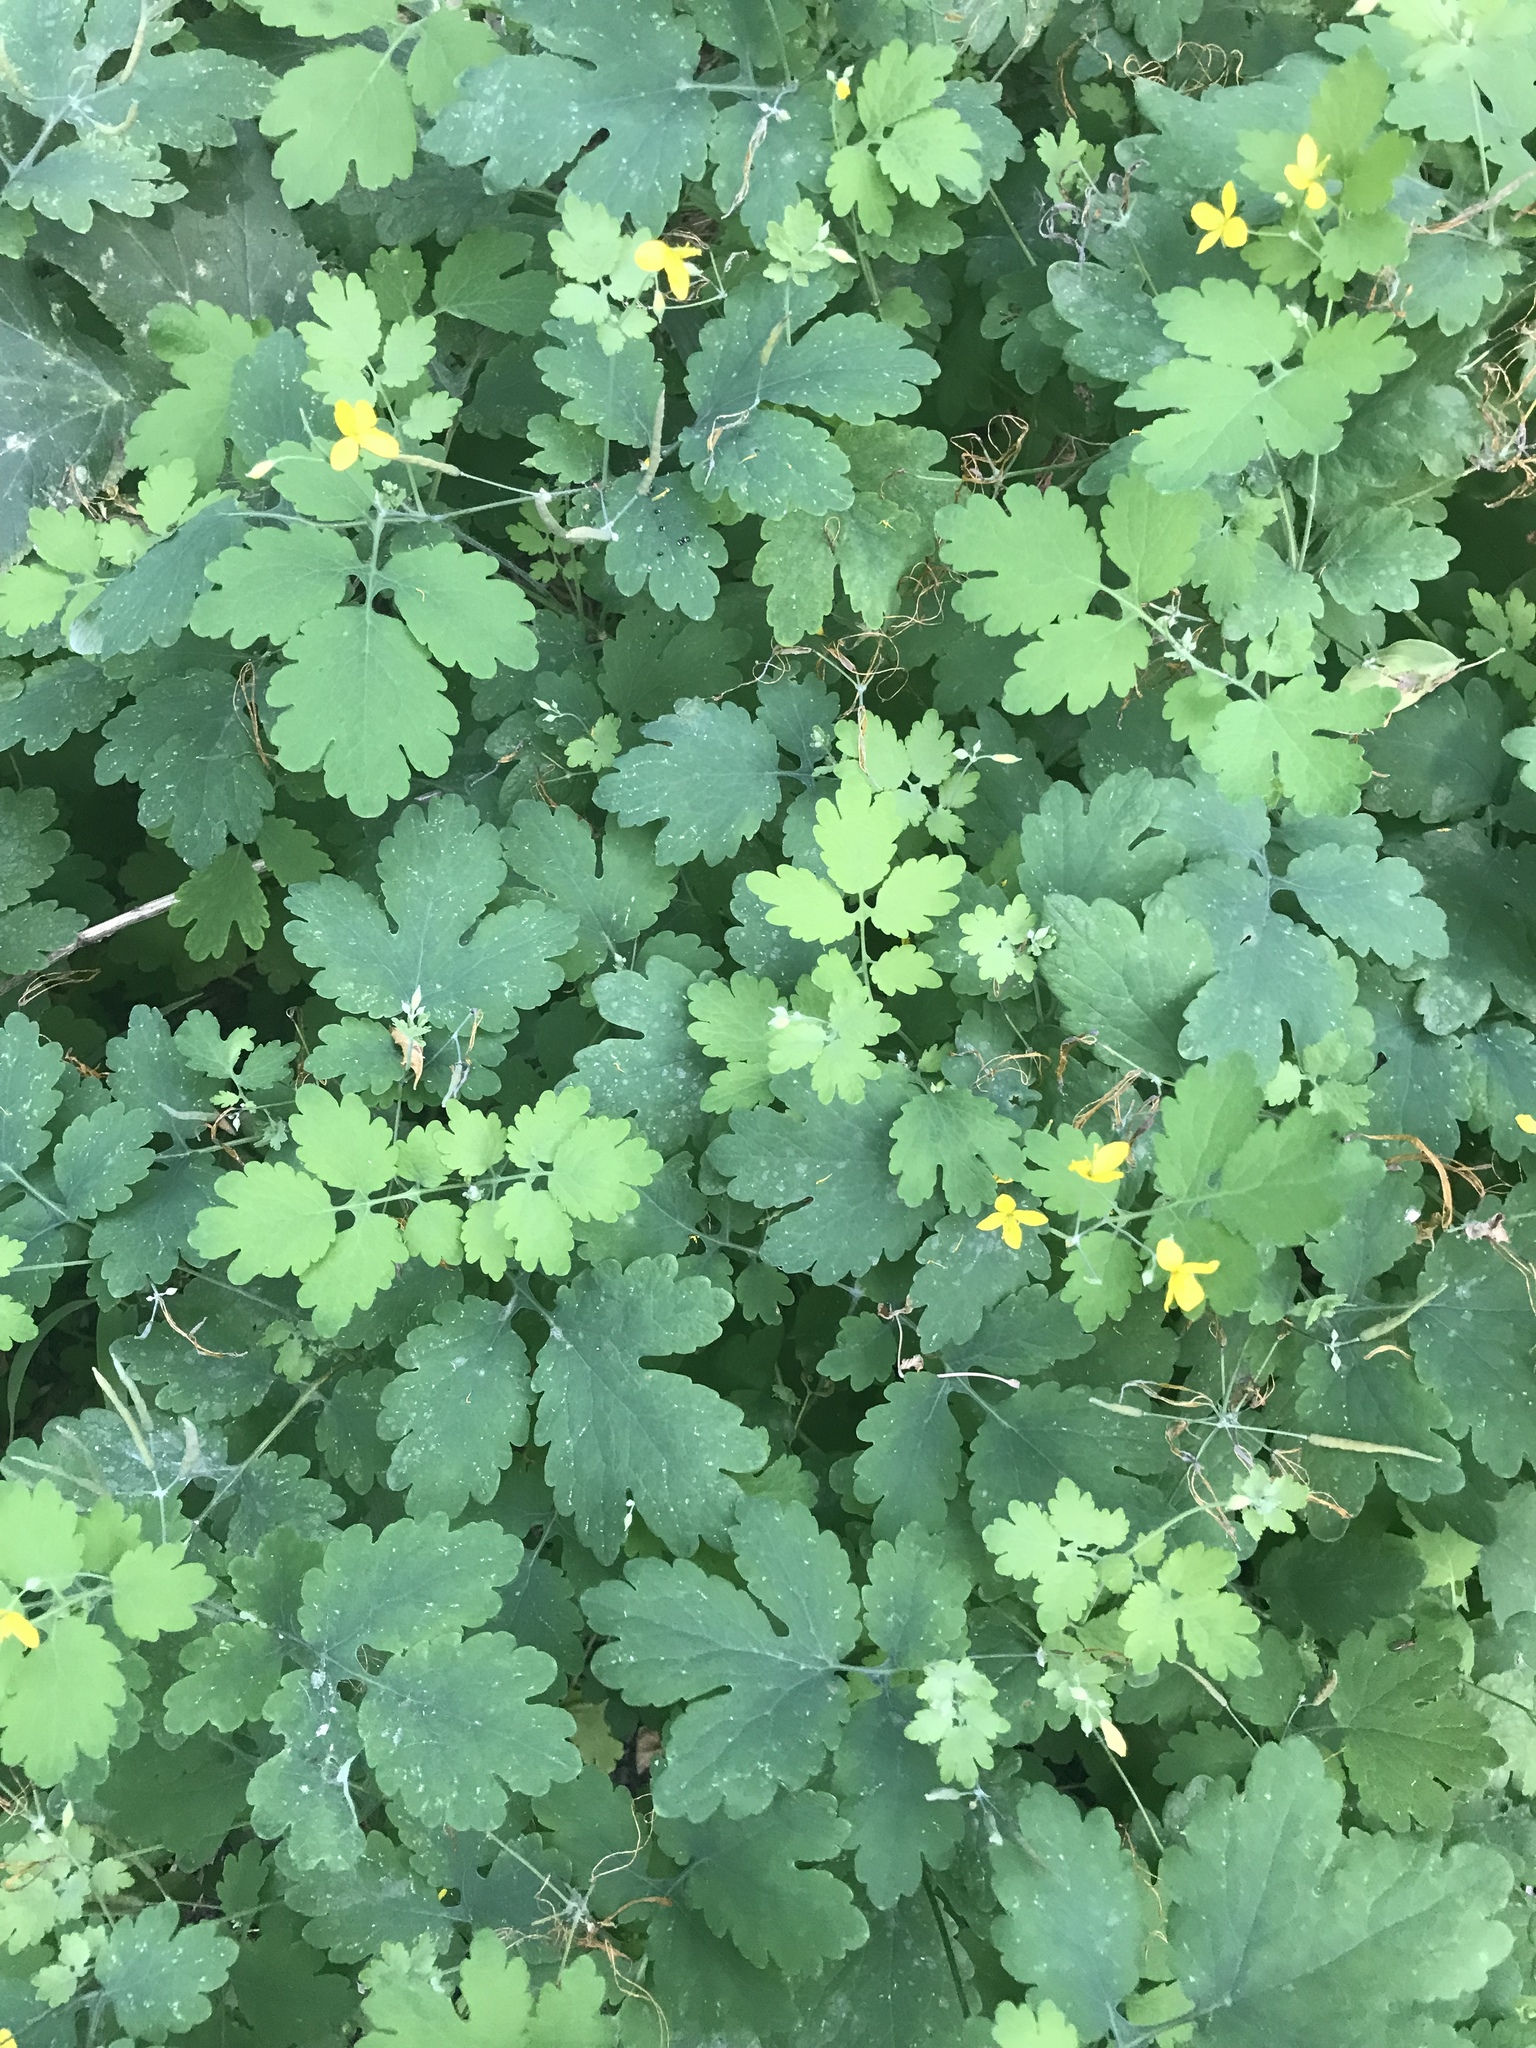 photo of Chelidonium majus (greater celandine) by Lac St. Leon Manitoba by lauramr11 via iNaturalist CC BY-NC